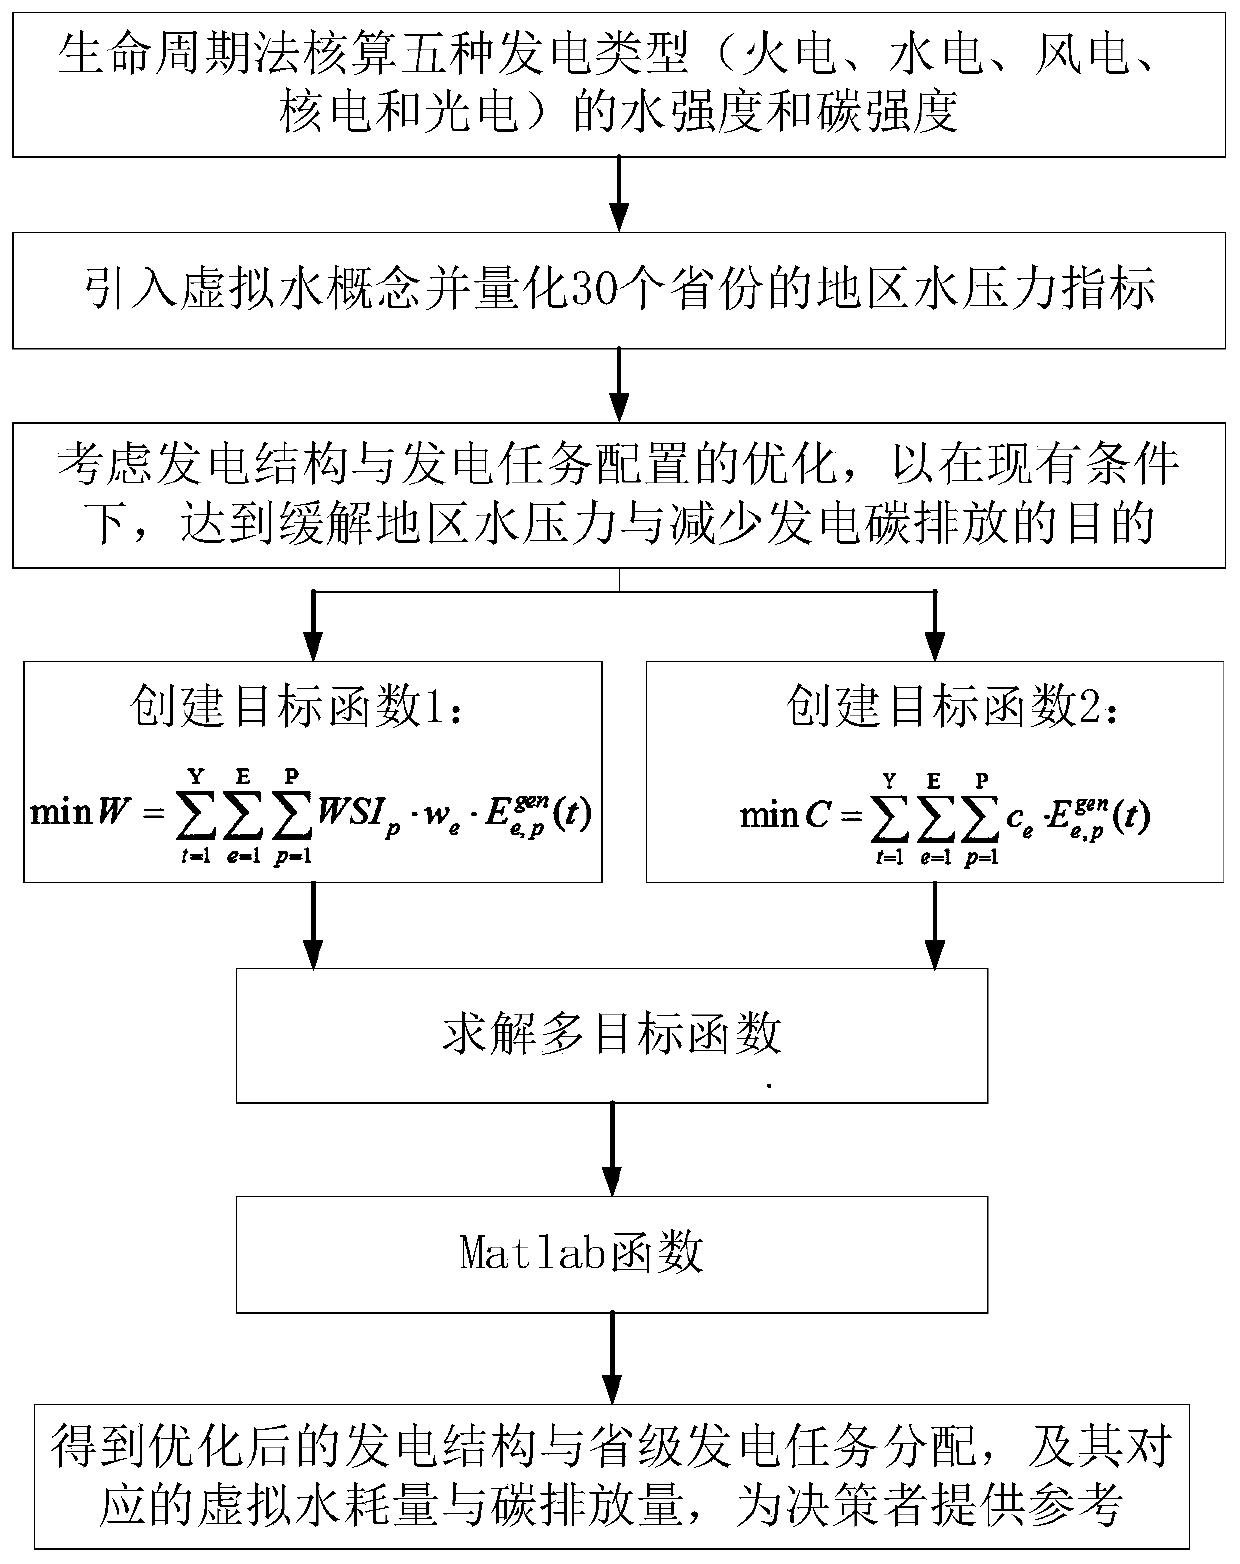 Power system power generation structure optimization and task allocation method and system